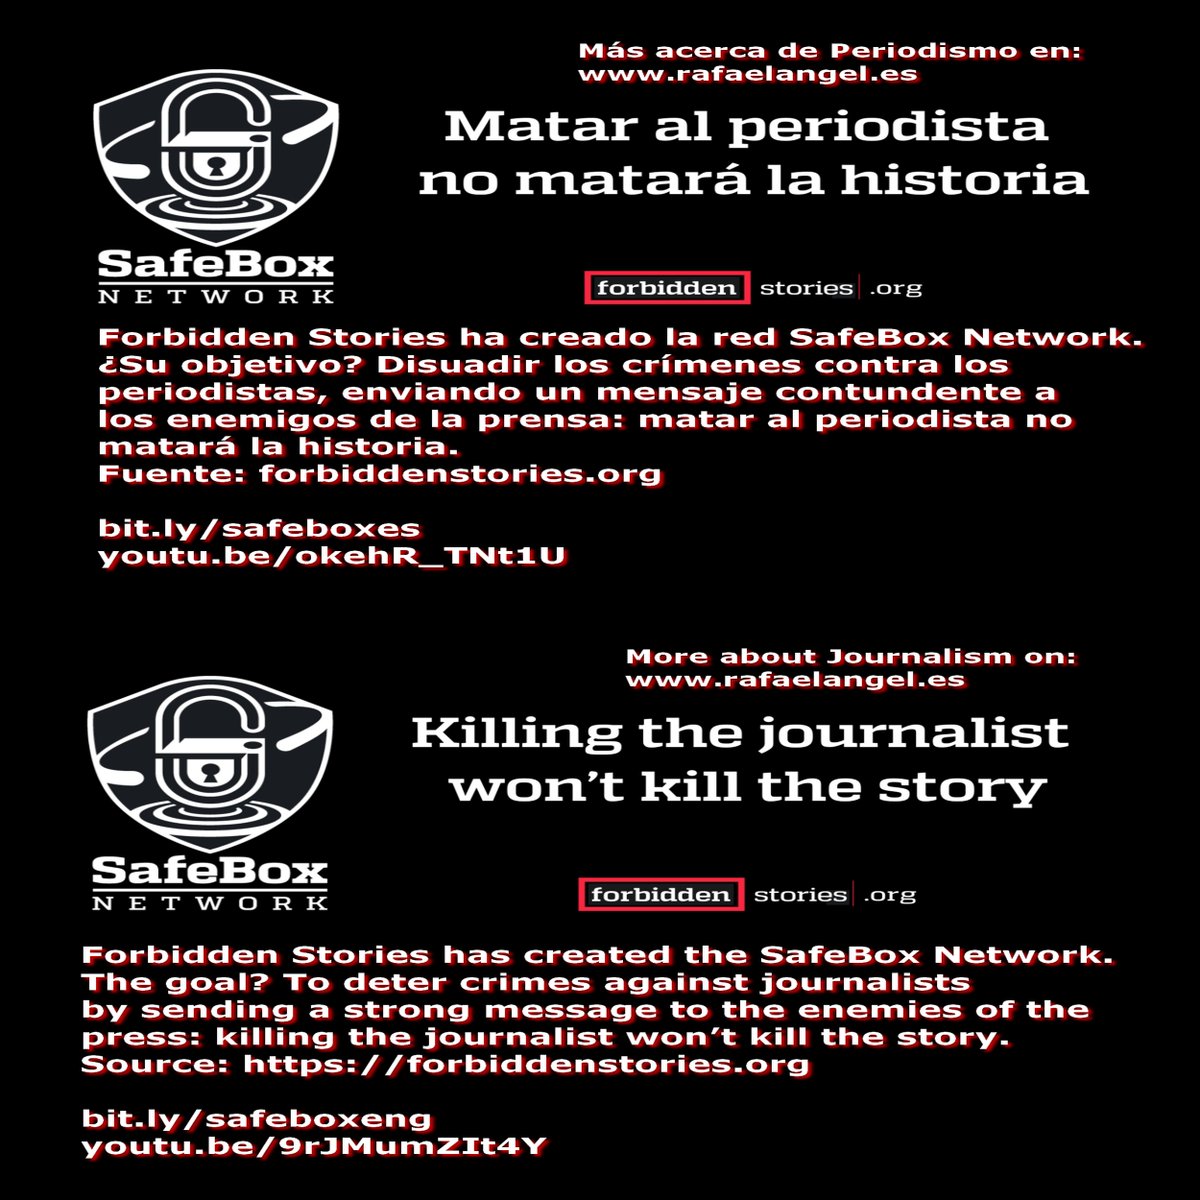 ⚠️#SafeBox #Network #SafeBoxNetwork #Enemies of the #press: #killing the #journalist won’t kill the story. #PressFreedom #Journ
Source: @FbdnStories forbiddenstories.org
bit.ly/safeboxeng
youtu.be/9rJMumZIt4Y

More about #Journalism:
@pressnet rafaelangel.es